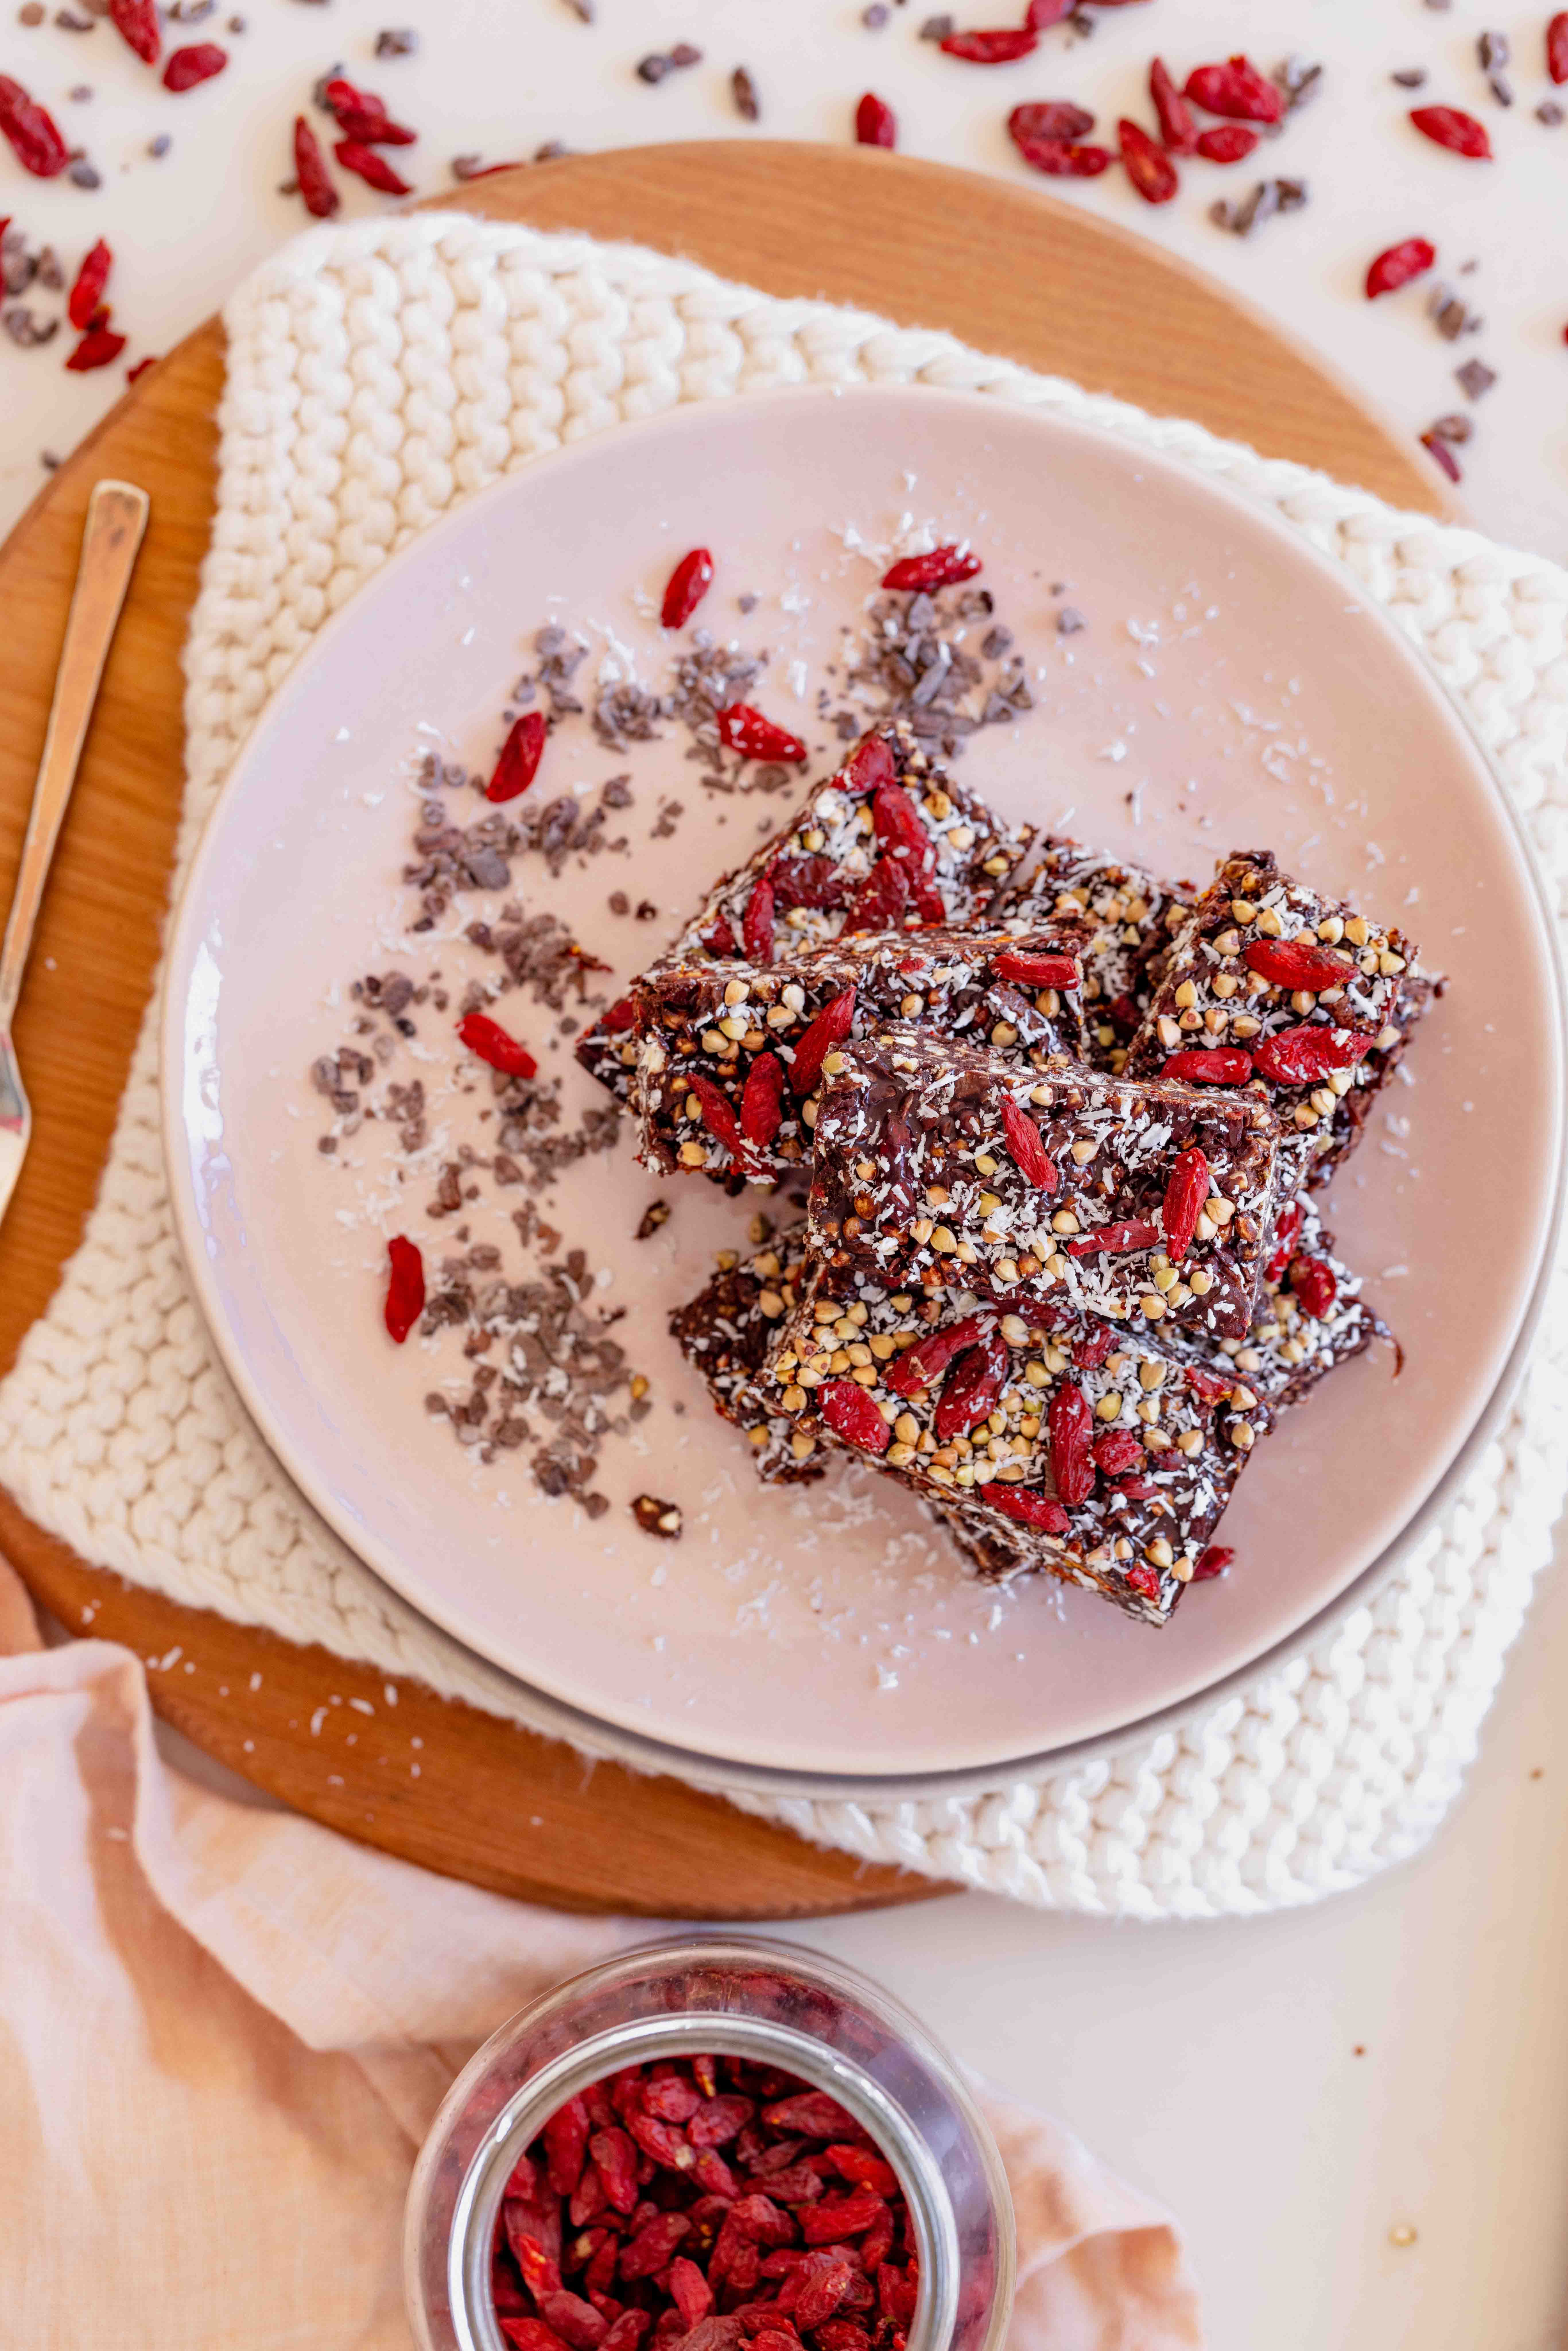 Top down of pink plate chocolate coated goji berries, buckwheat and coconut with pink nails